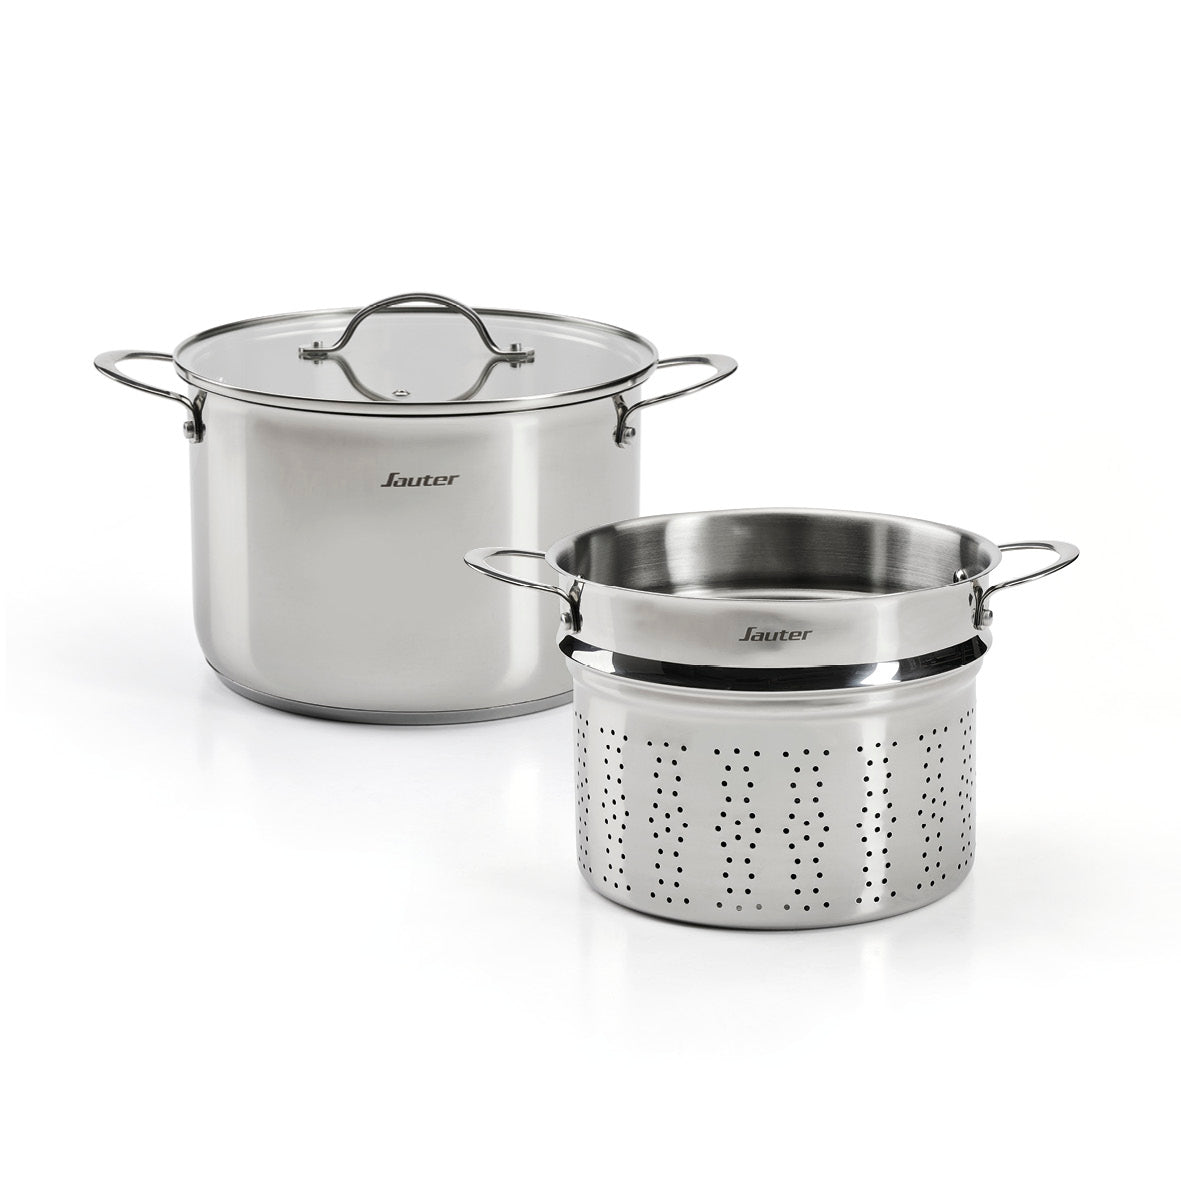 Pasta pot with insert Qulinox Pro - Triple Bottom - Stainless steel - with lid - 24 cm